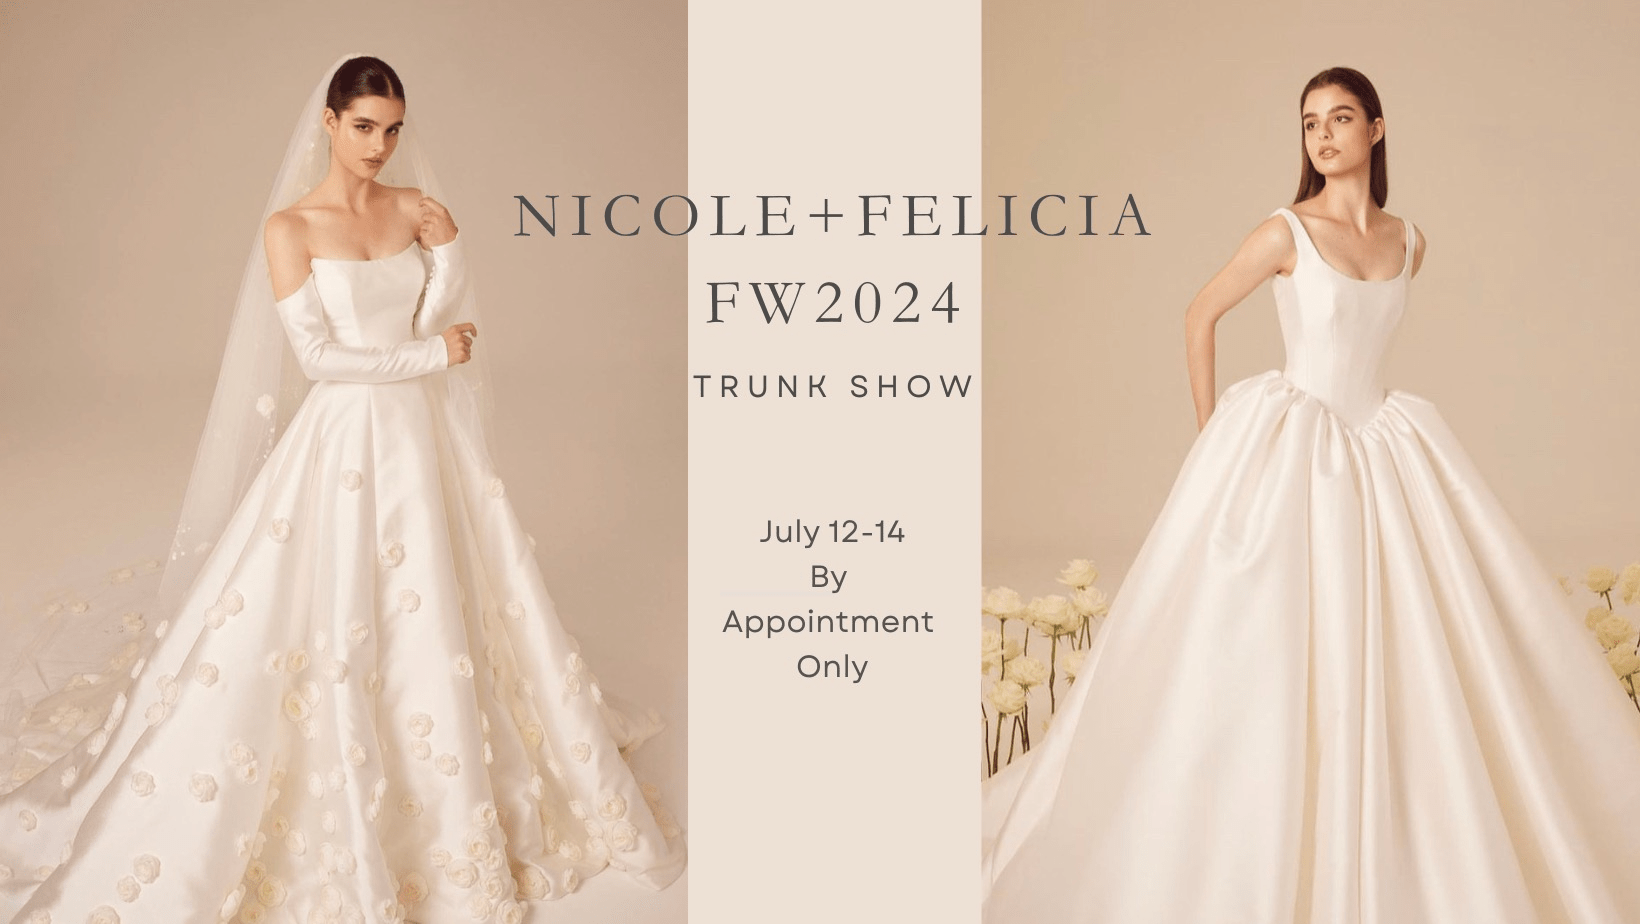 Nicole And Felicia Trunk Show 2024 Tampa St Petersburg Florida